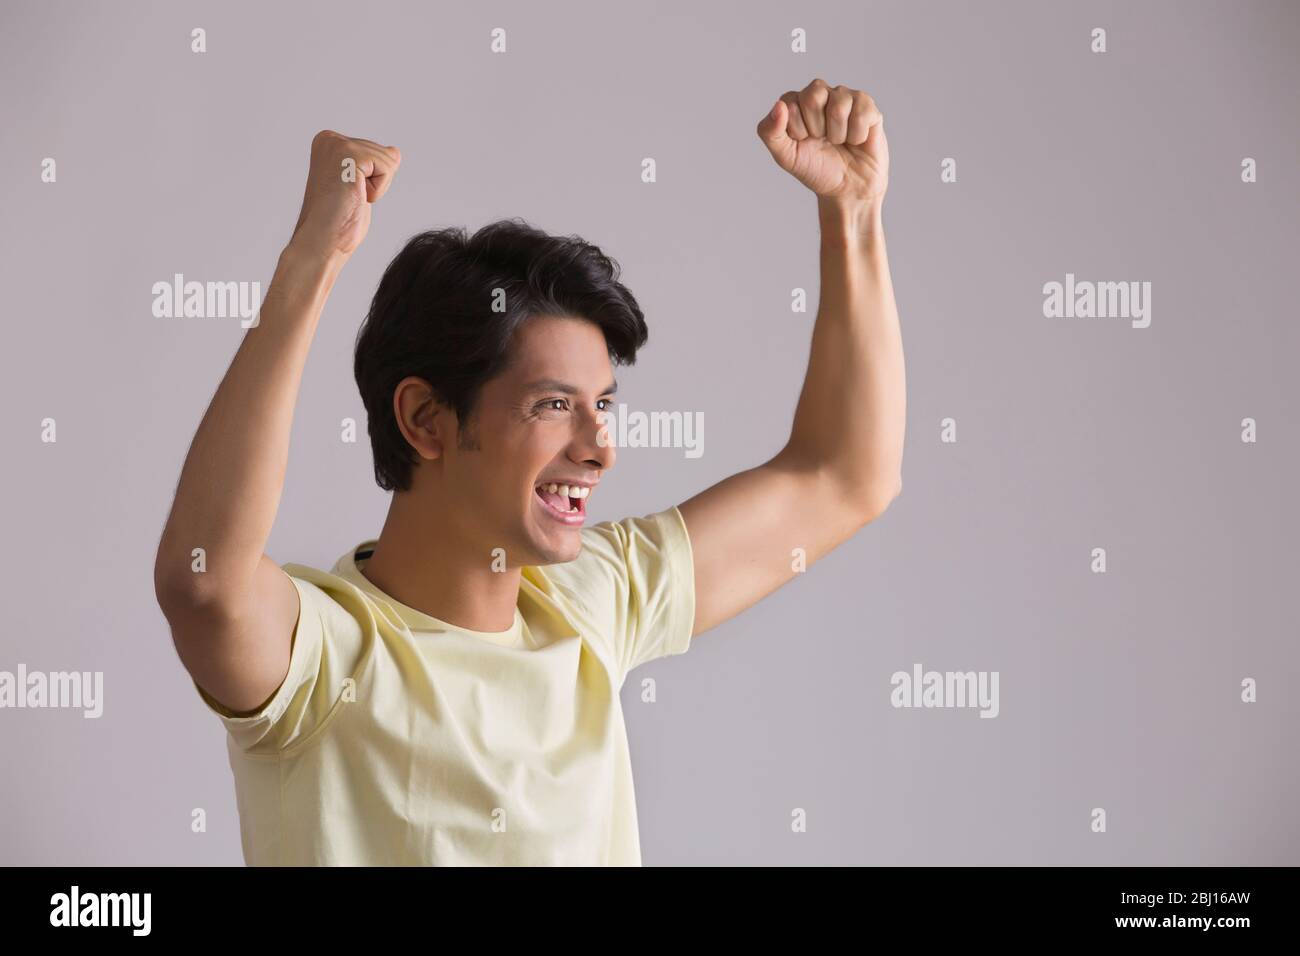 young man cheering by raising hands up Stock Photo